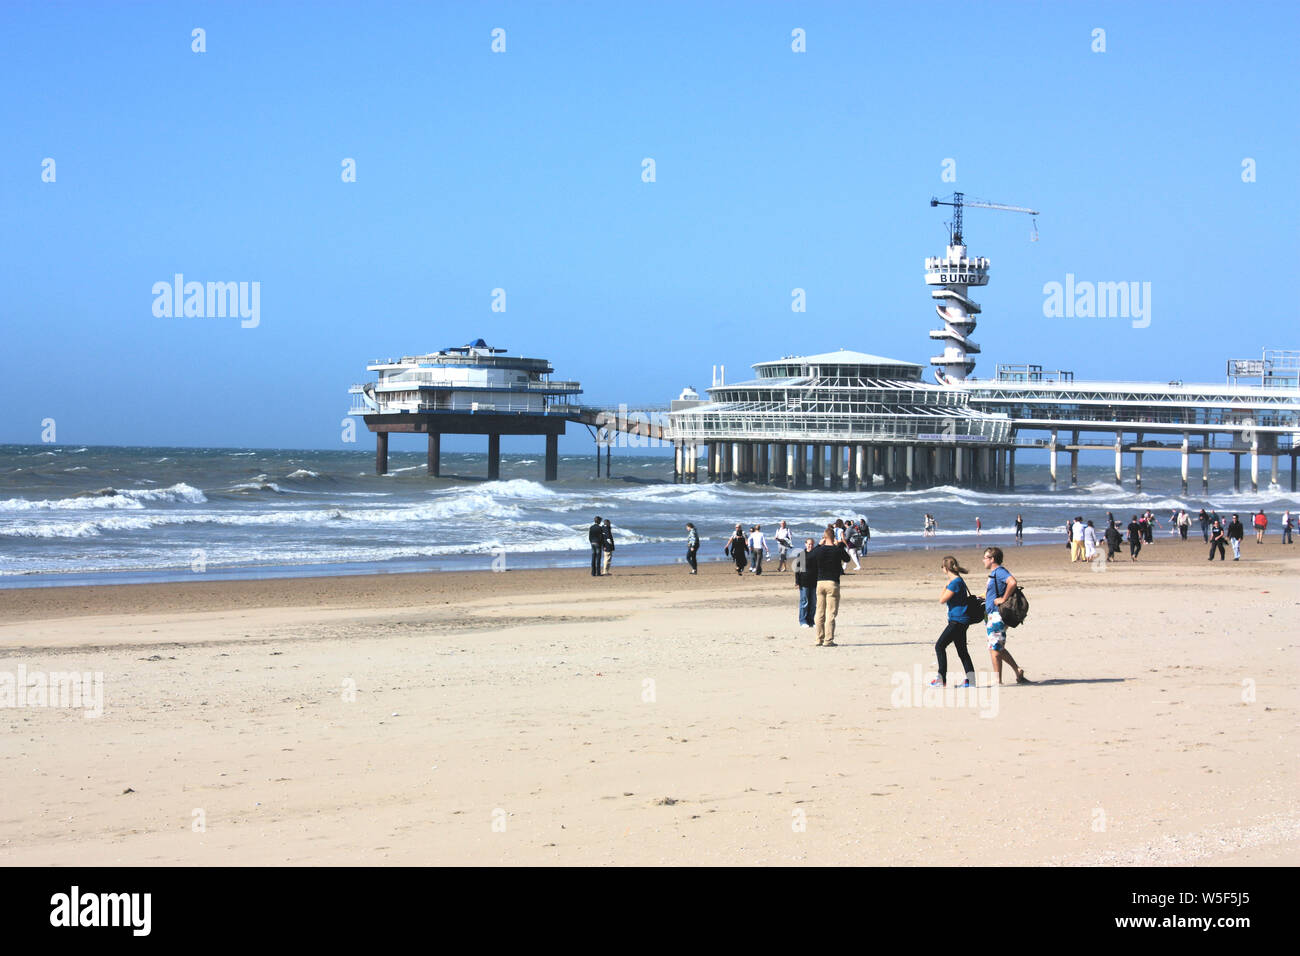 The Pier is one of the most notable icons in Scheveningen. Nearly 400 metres long and 45 metres high, it offers a beautiful view of the sea. Stock Photo